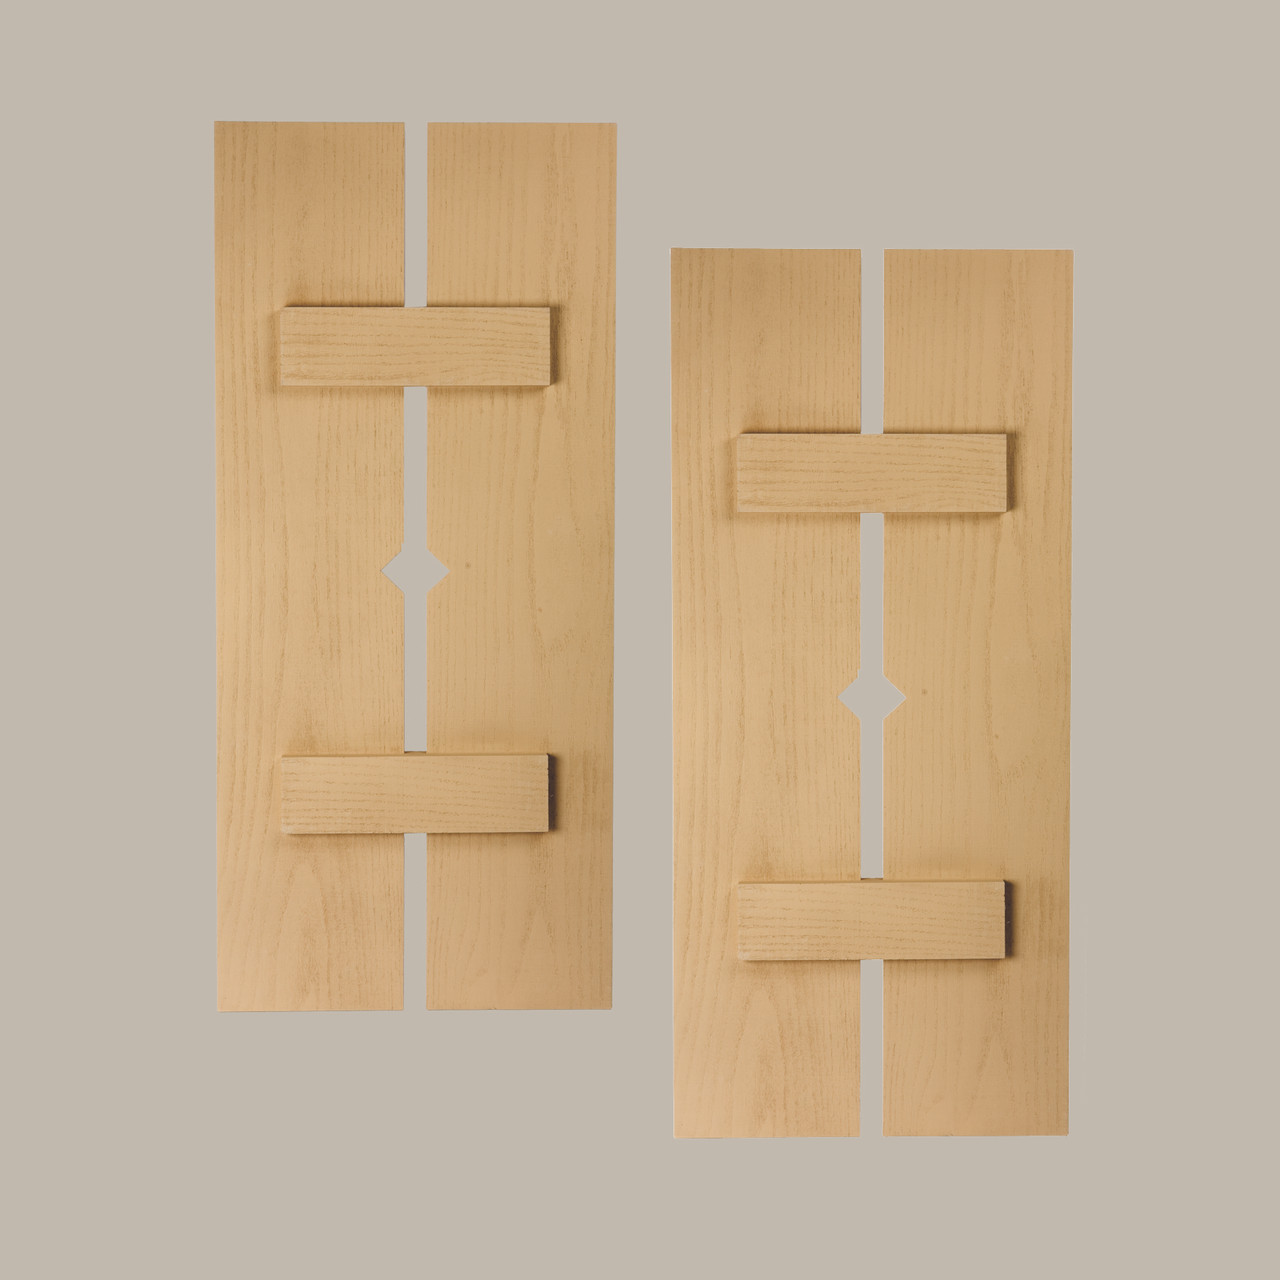 12 inch by 78 inch Plank Shutter with 2-Plank, Diamond